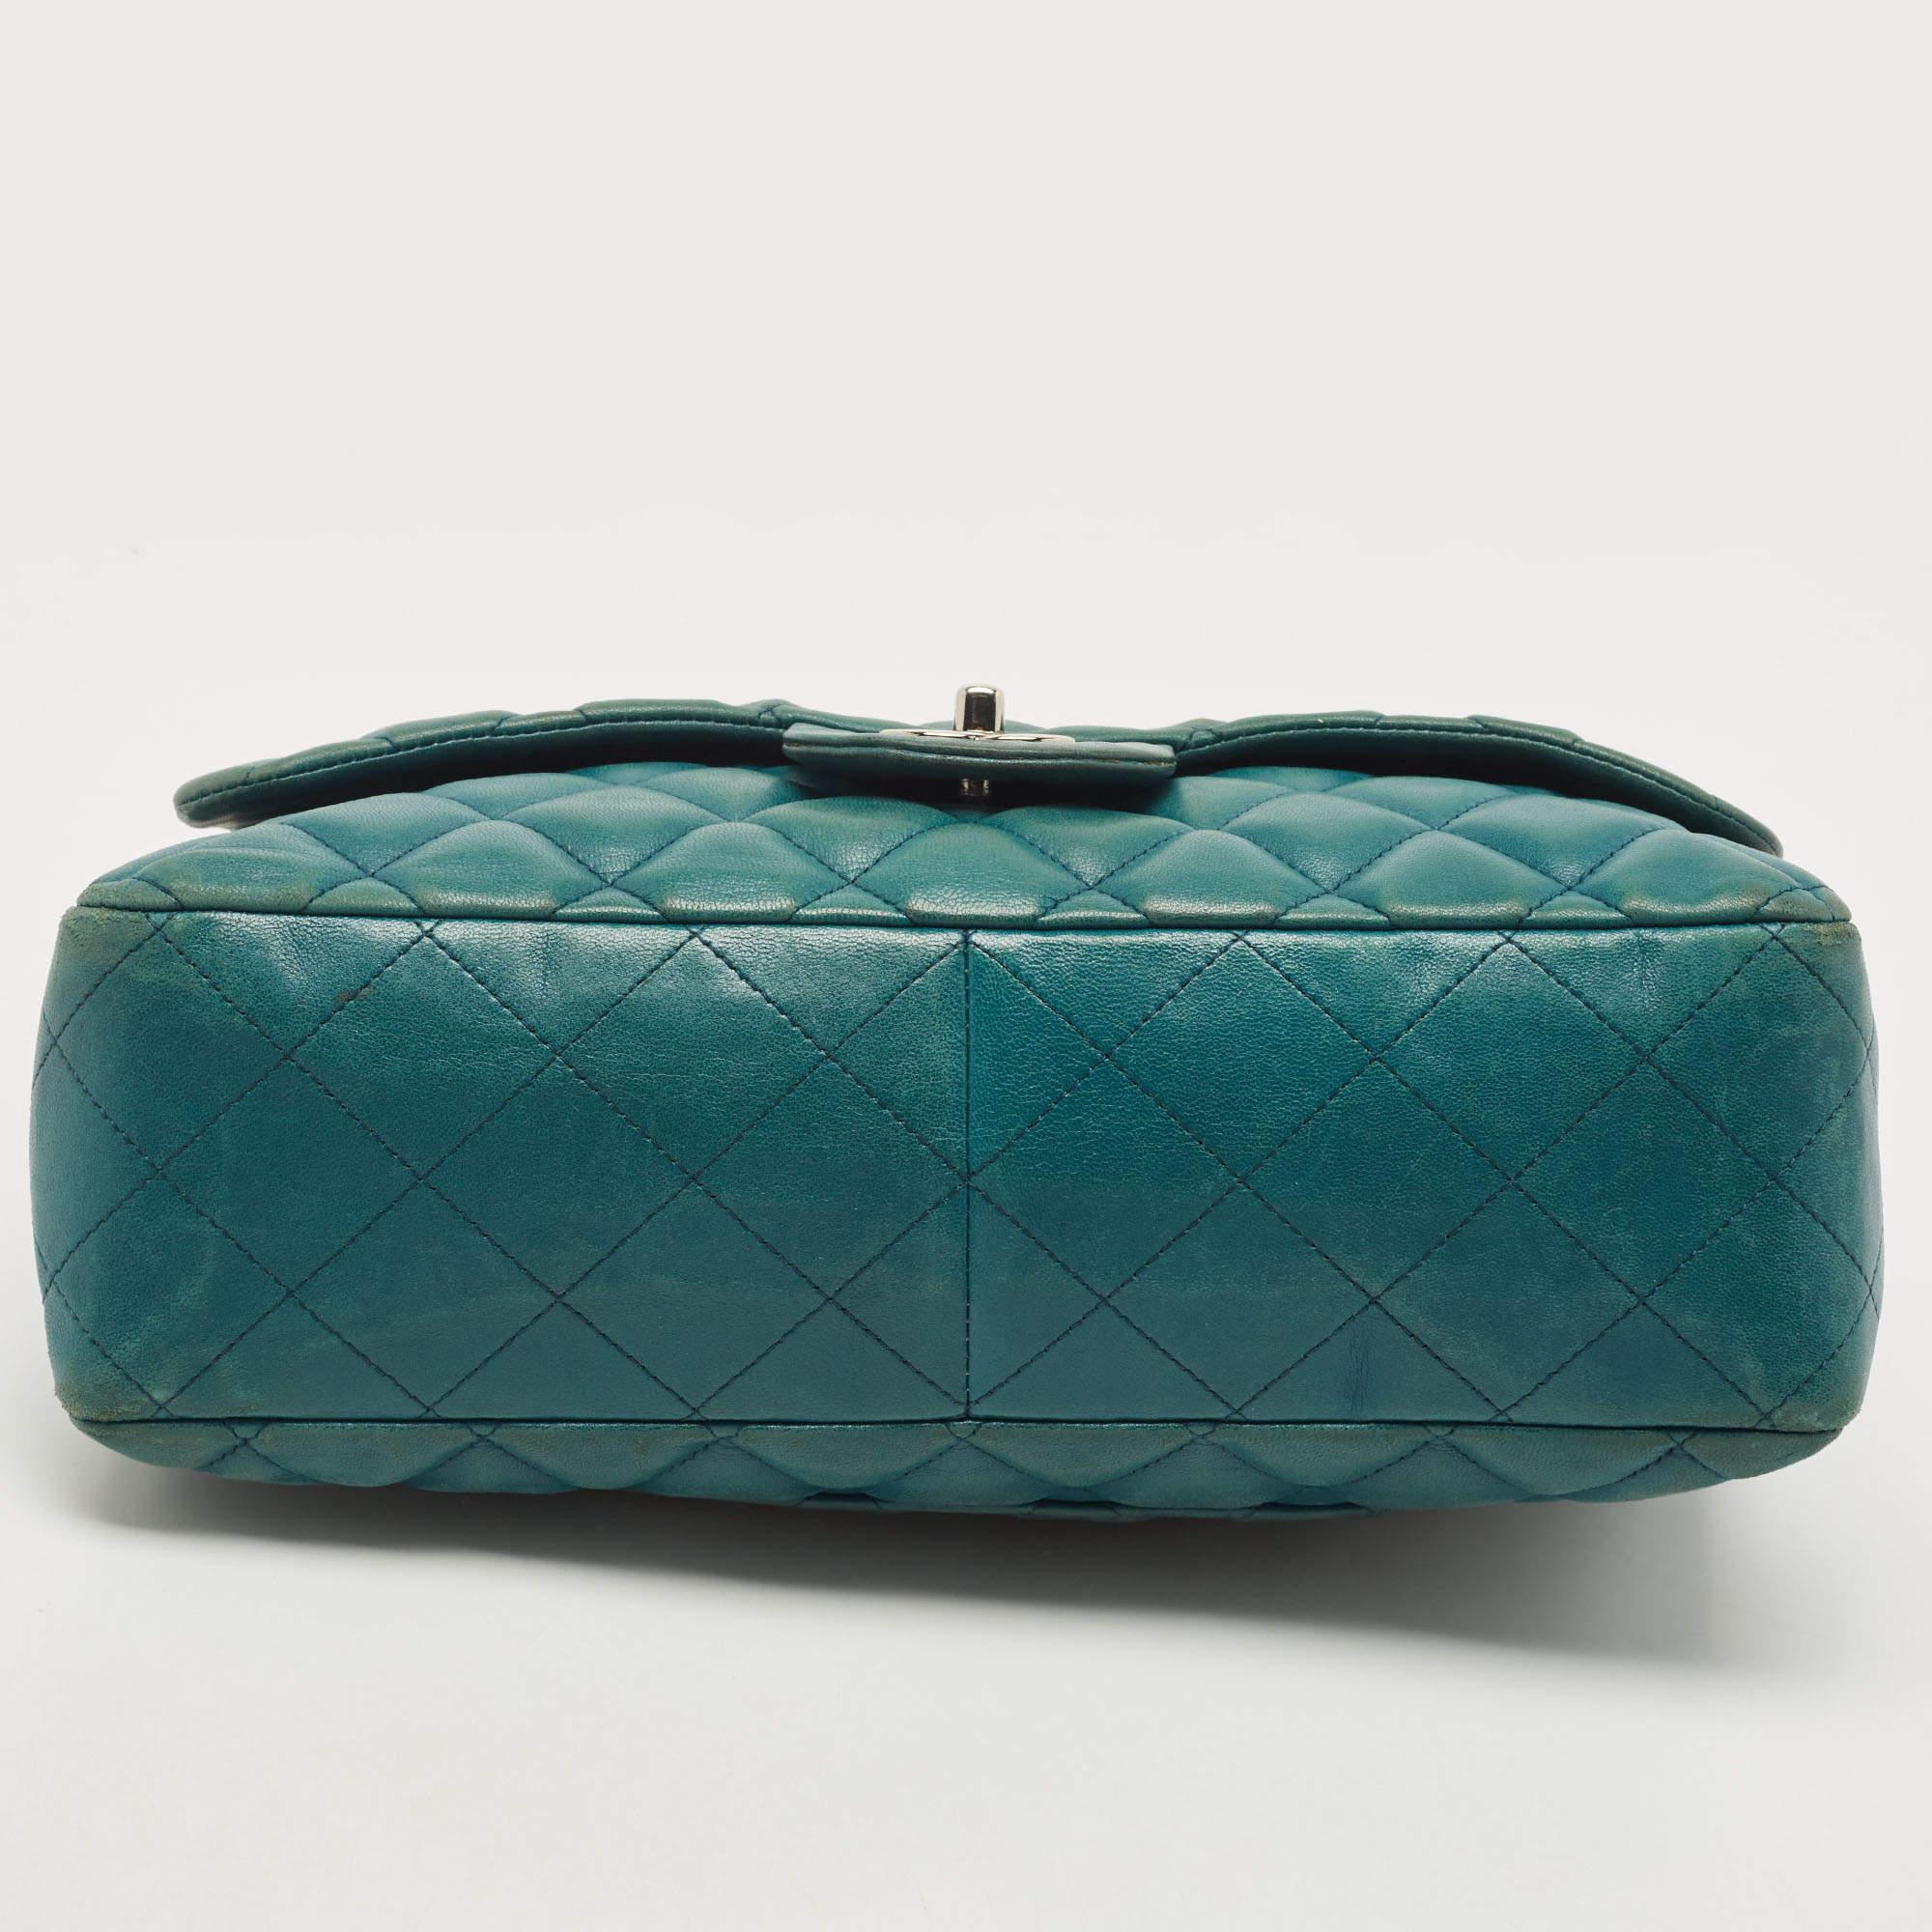 Chanel Teal Green Quilted Leather Jumbo Classic Single Flap Bag 8